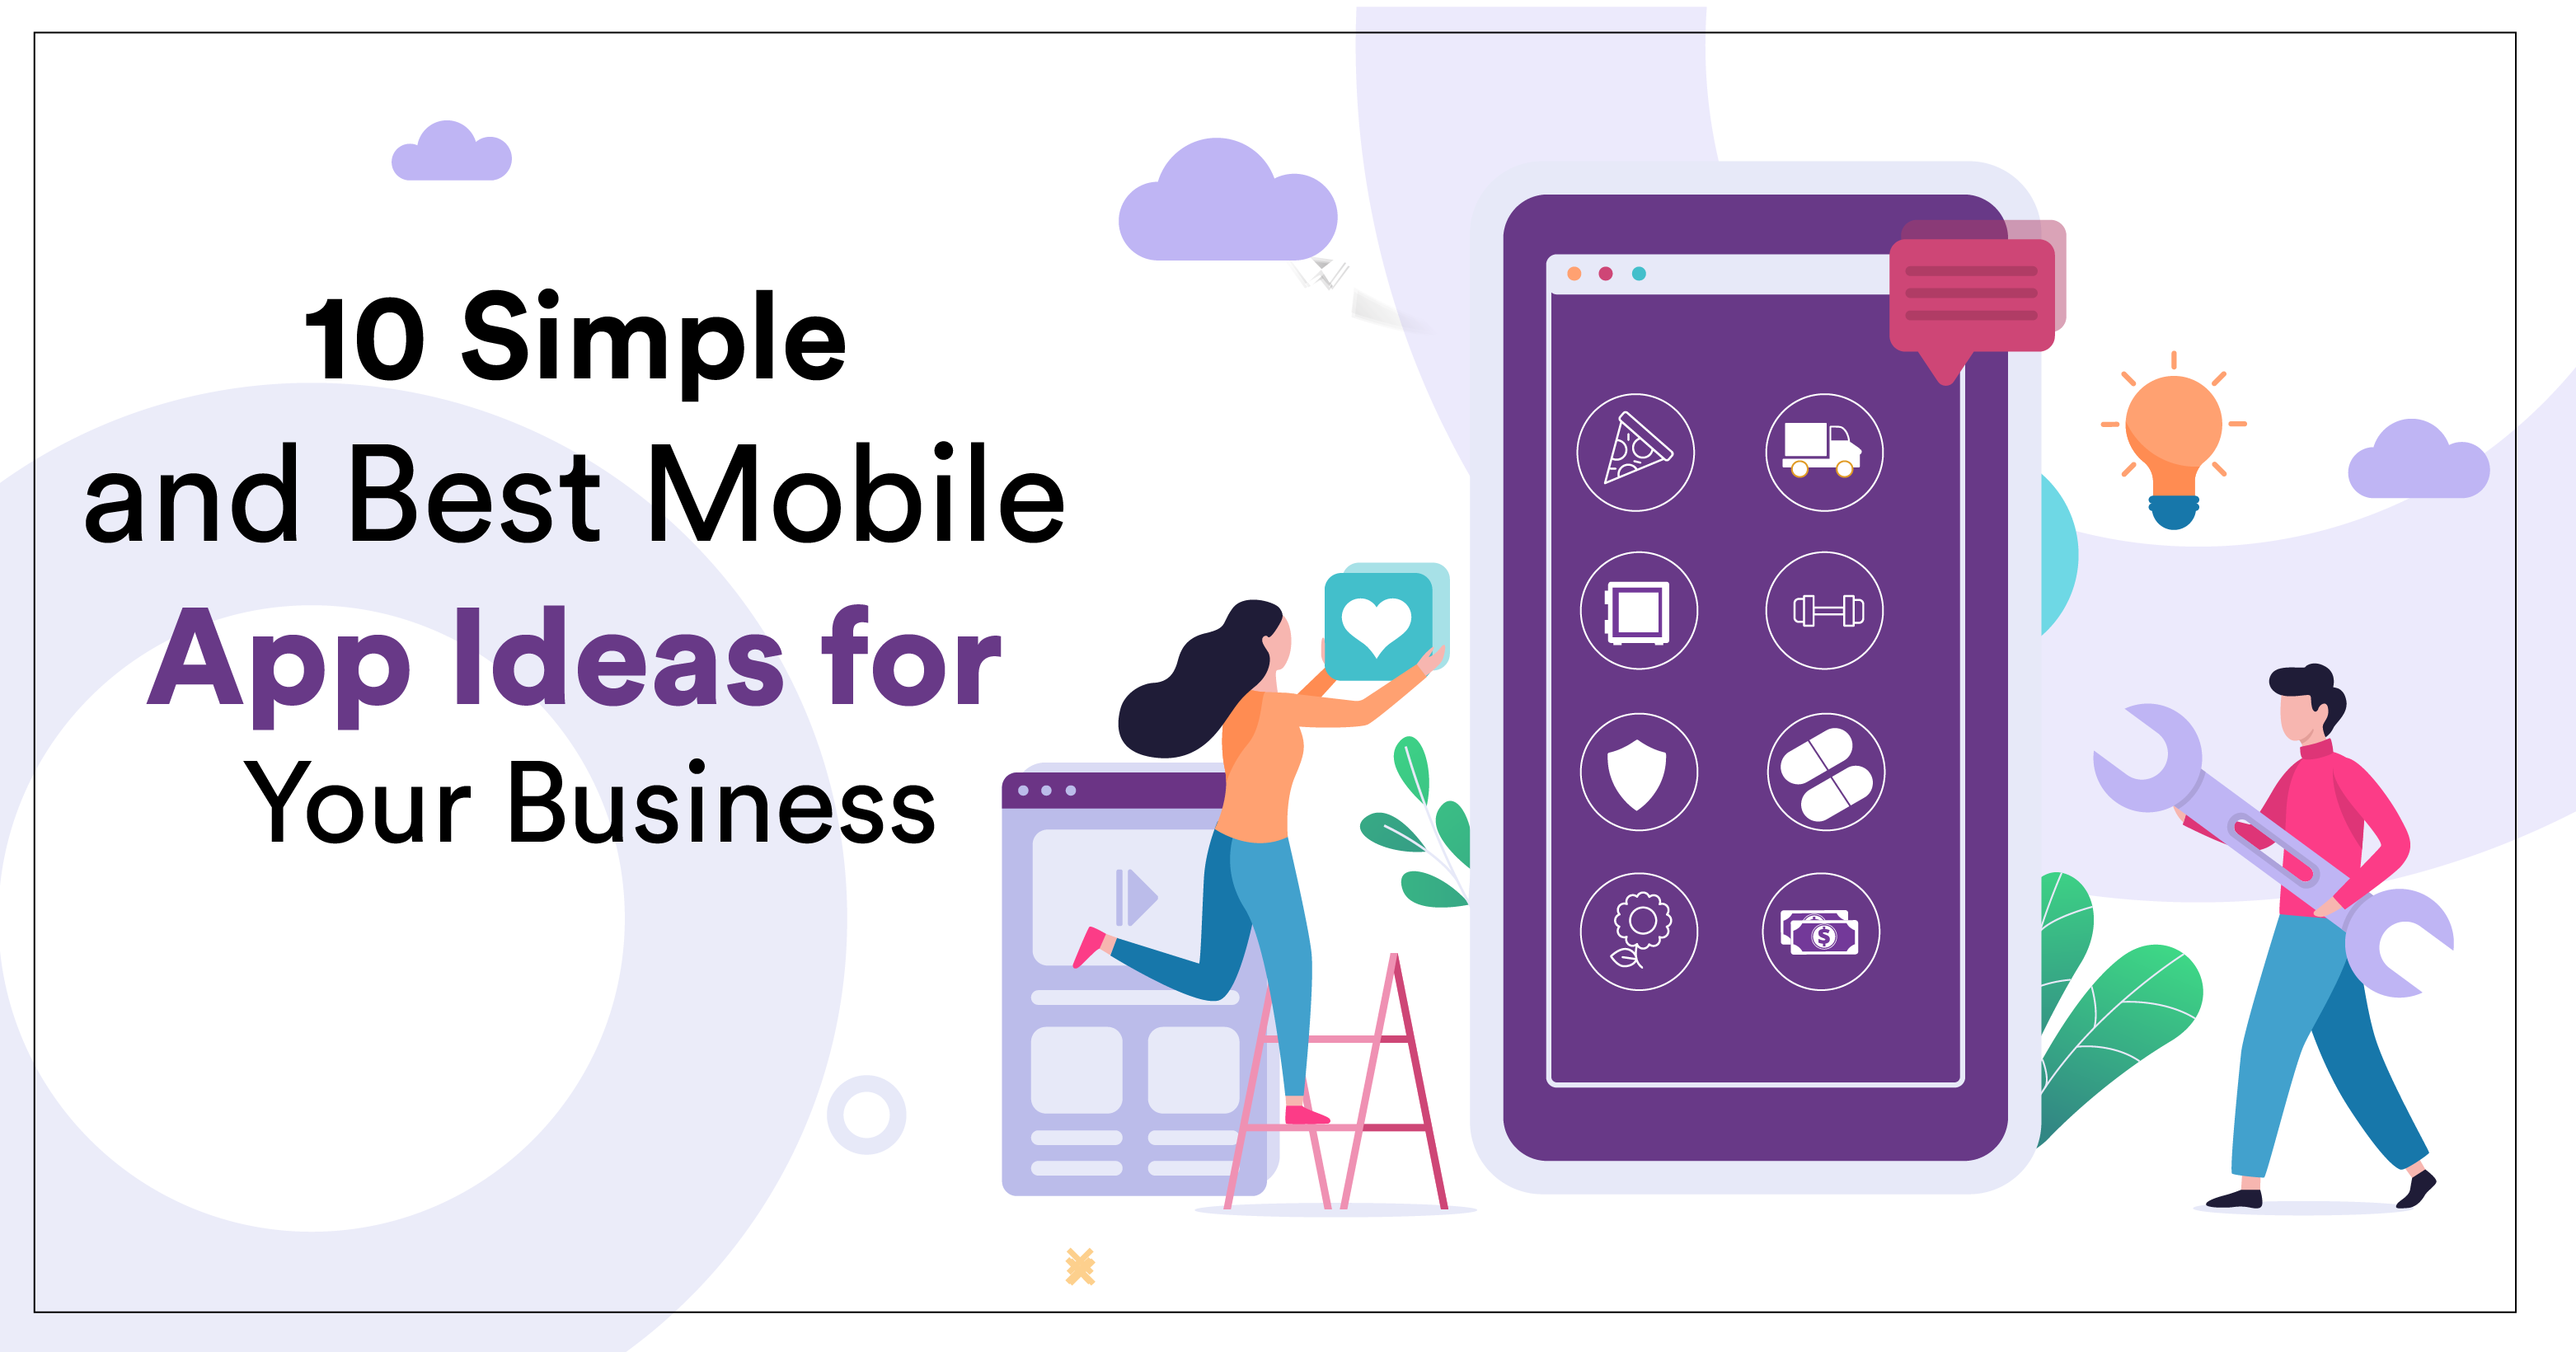 10-simple-and-best-mobile-app-ideas-for-your-business